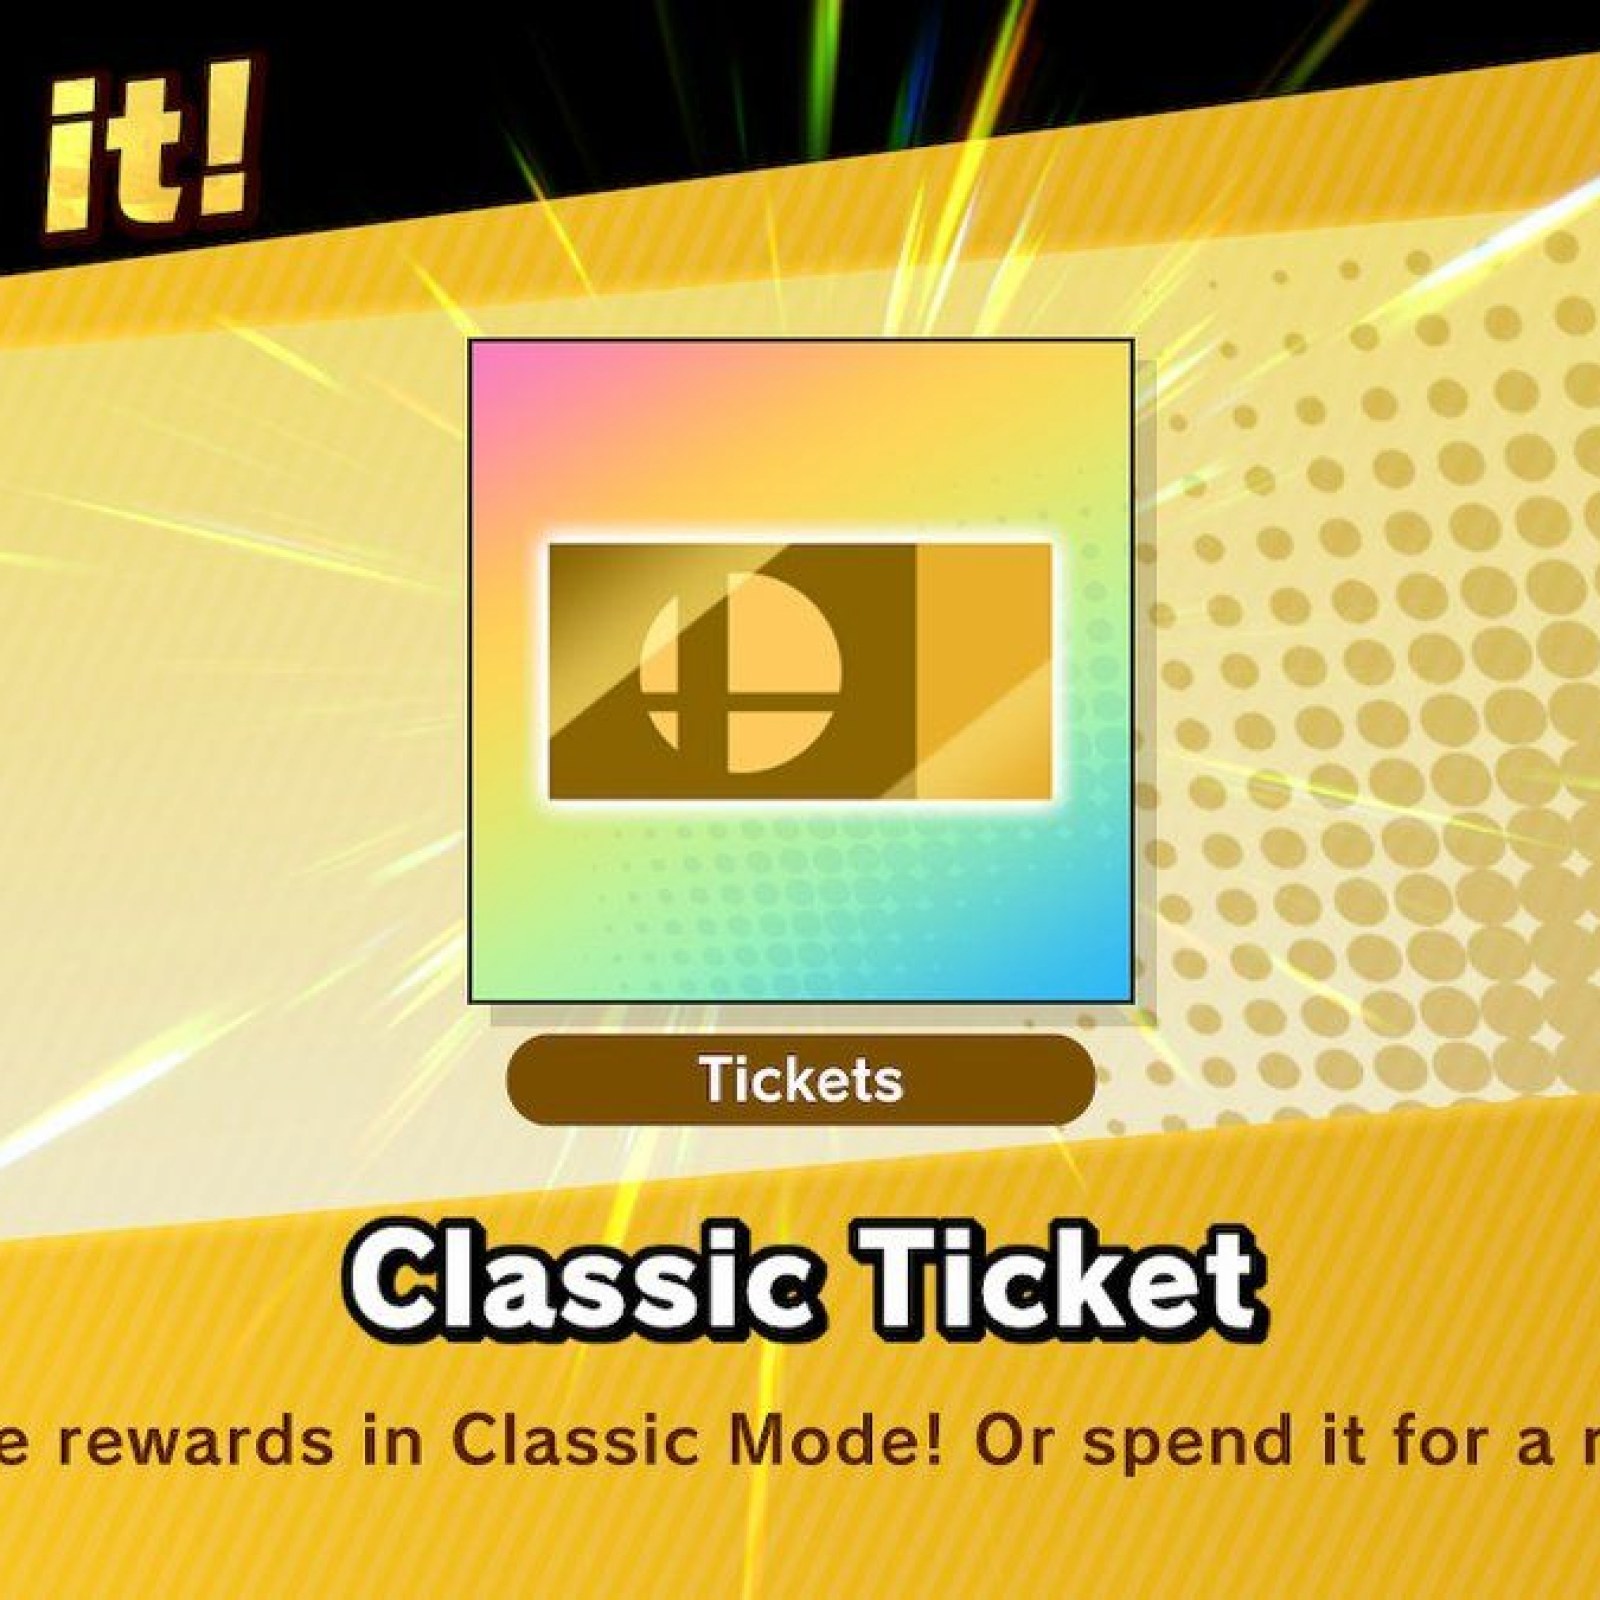 Smash Ultimate Classic Tickets How To Get More And What They Do - becoming phill cÃ³mo conseguir robux gratis 100 real